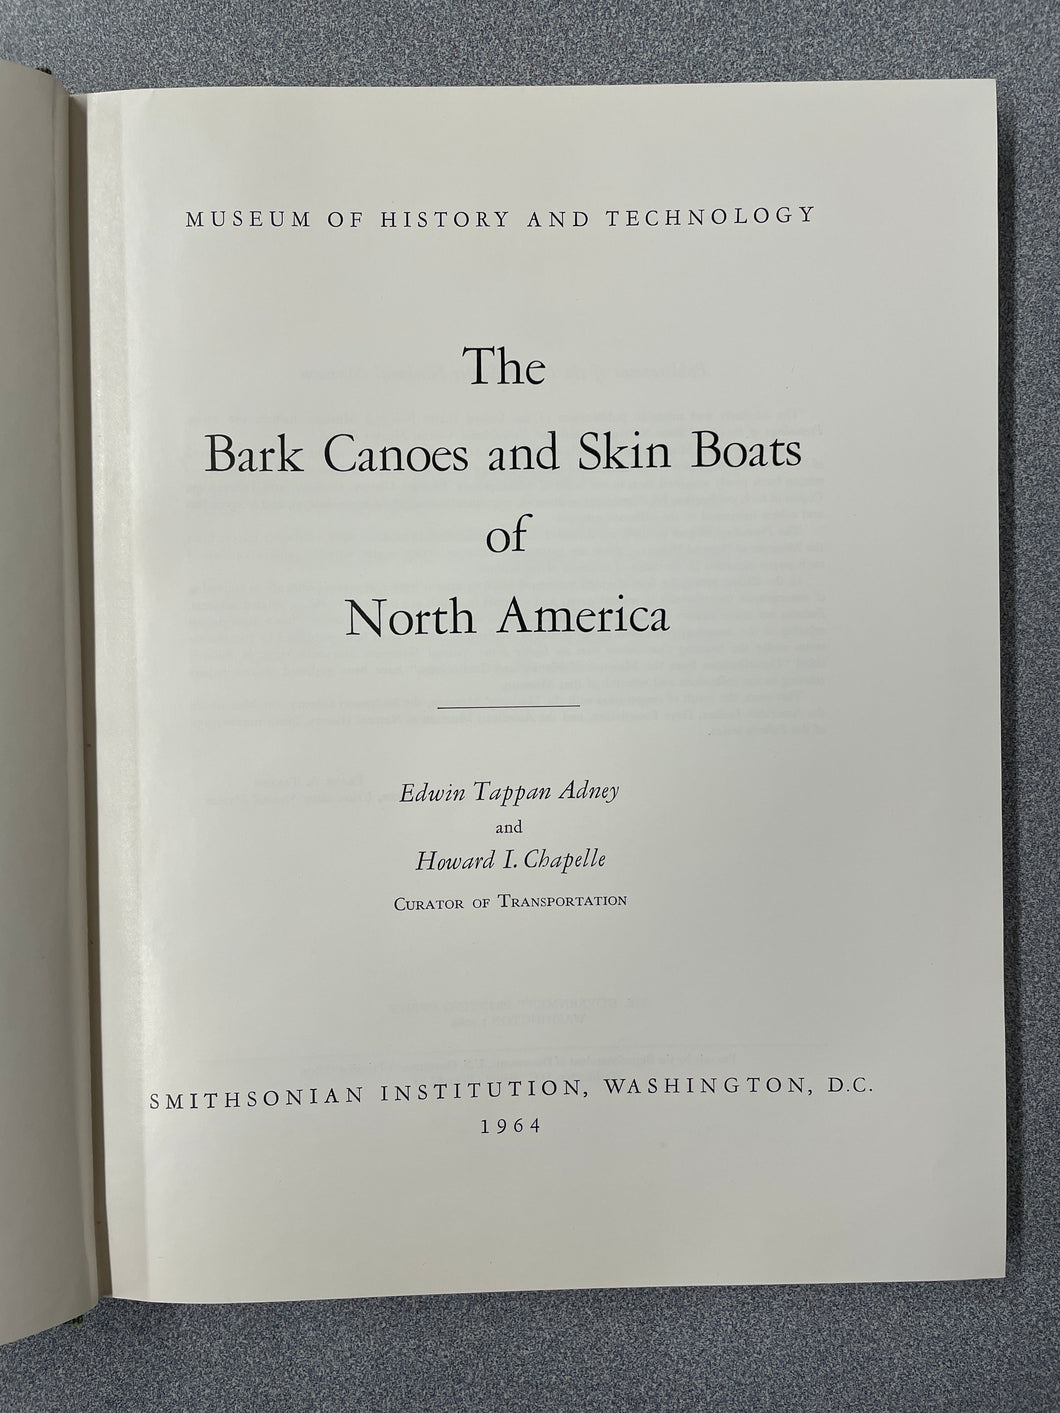 The Bark Canoes and Skin Boats of North America, Adney, Edwin Tappan and Howard I. Chapelle [1964] H 4/24